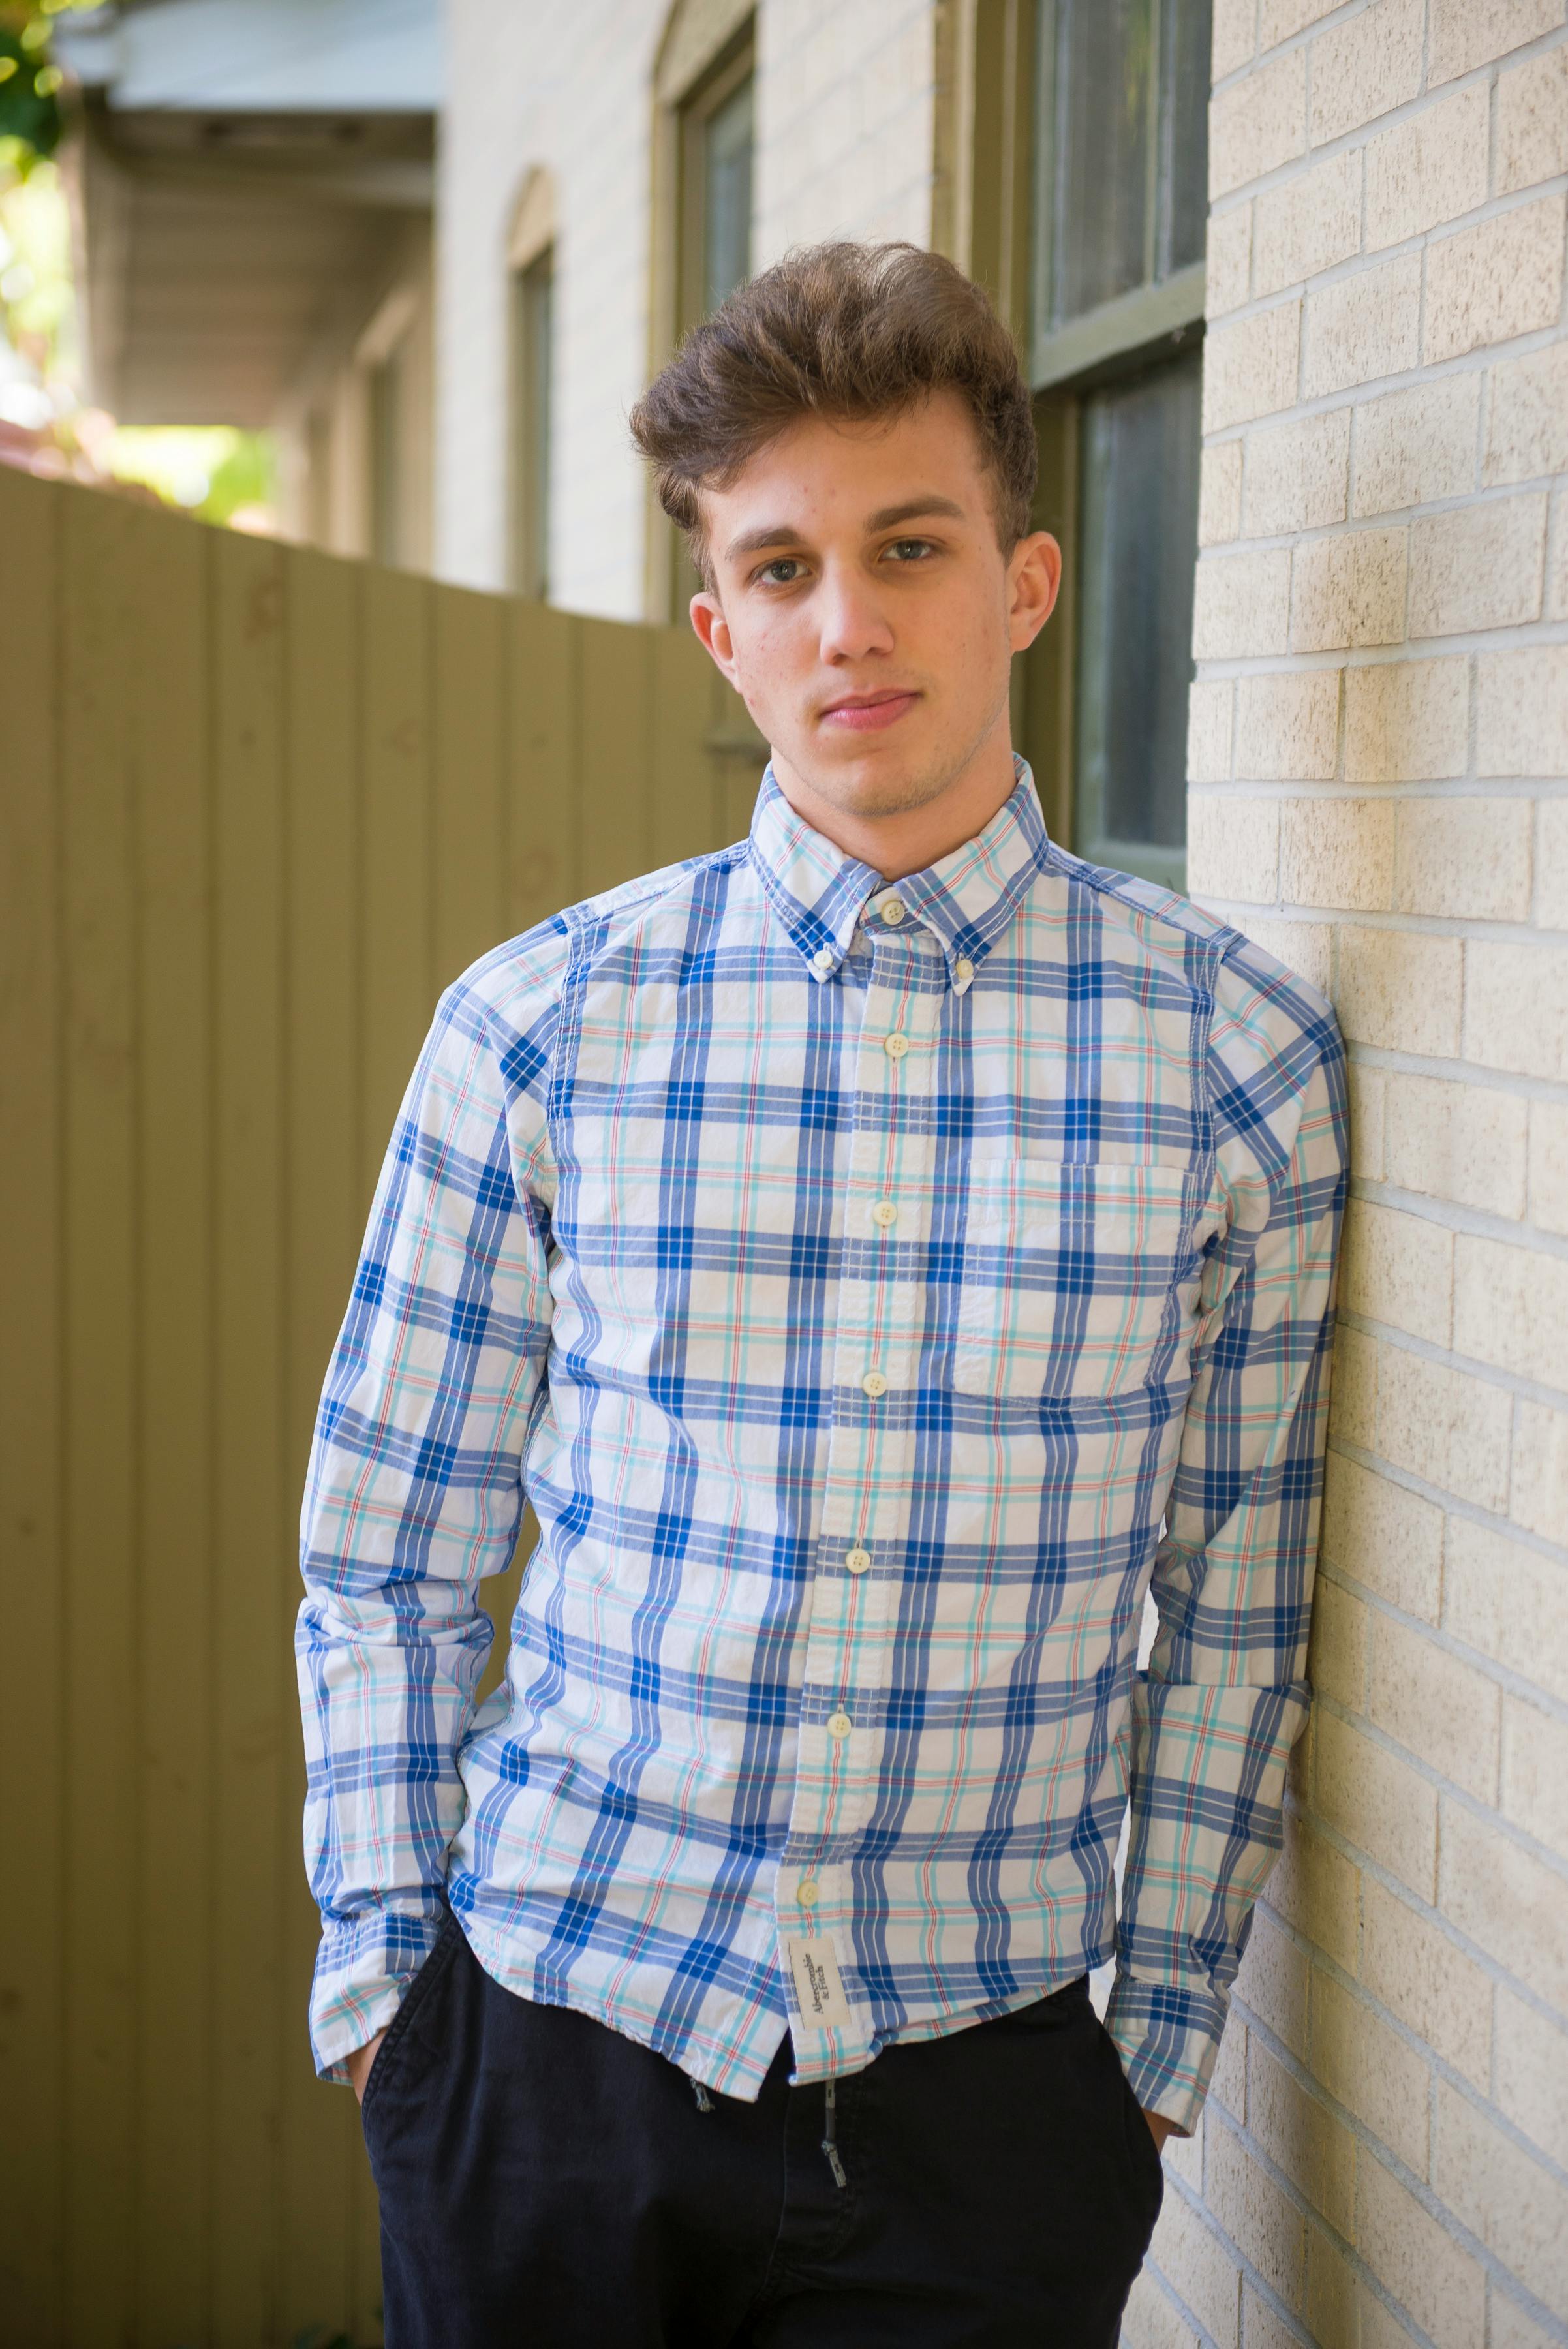 Man In White And Blue Plaid Dress Shirt · Free Stock Photo